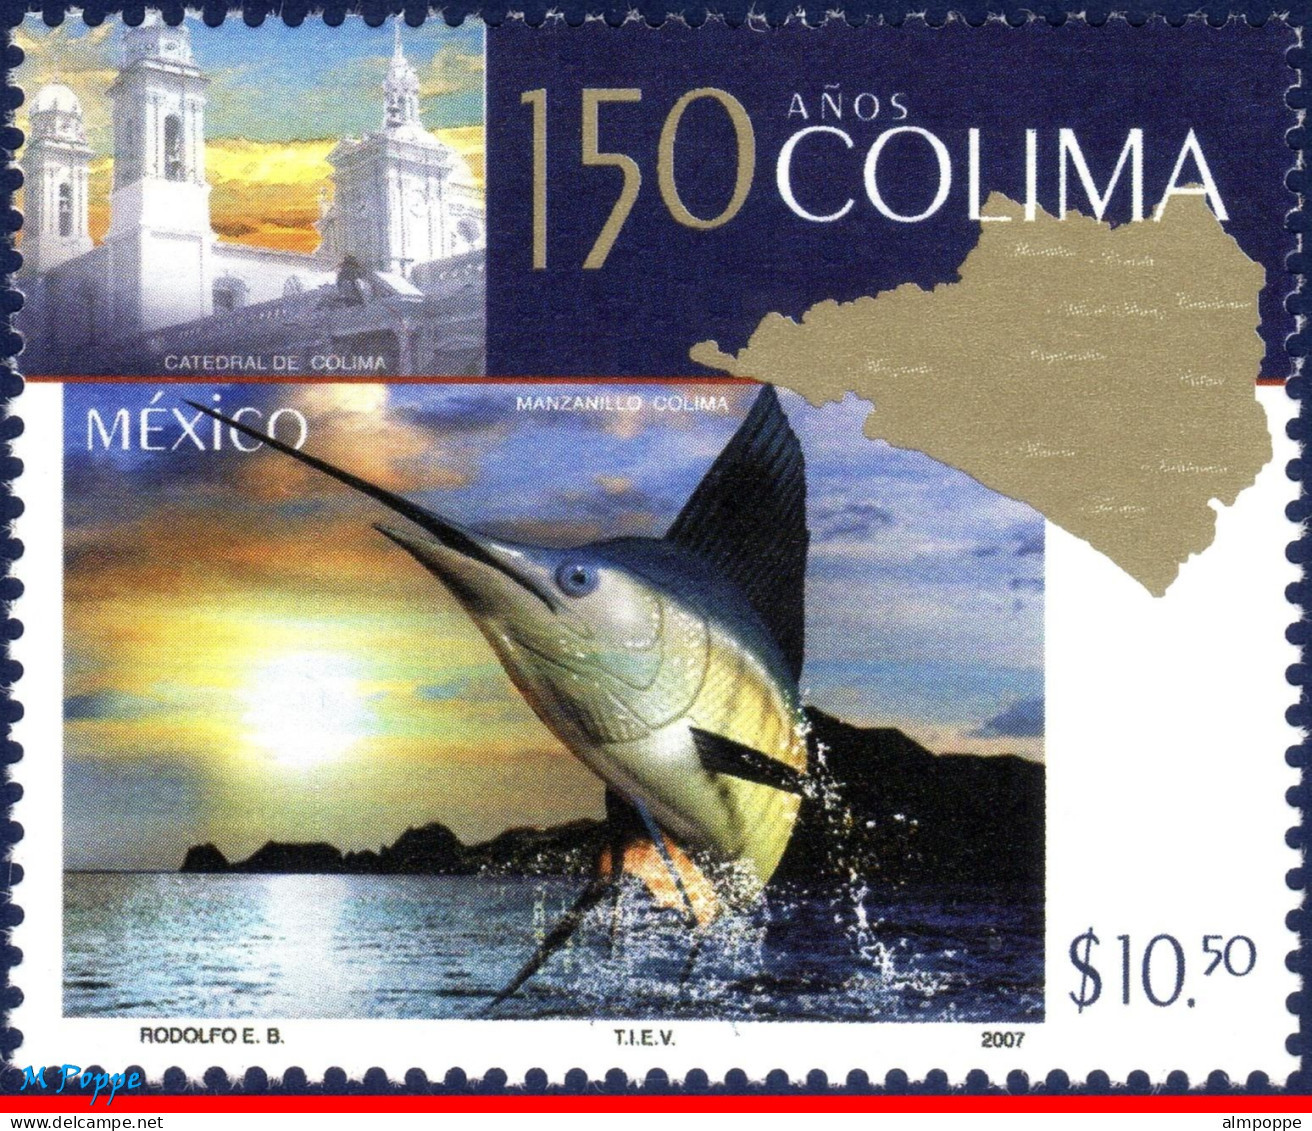 Ref. MX-2544 MEXICO 2007 - 150 YEAR OF STATE COLIMA,CITIES, MNH, FISH 1V Sc# 2544 - Fishes